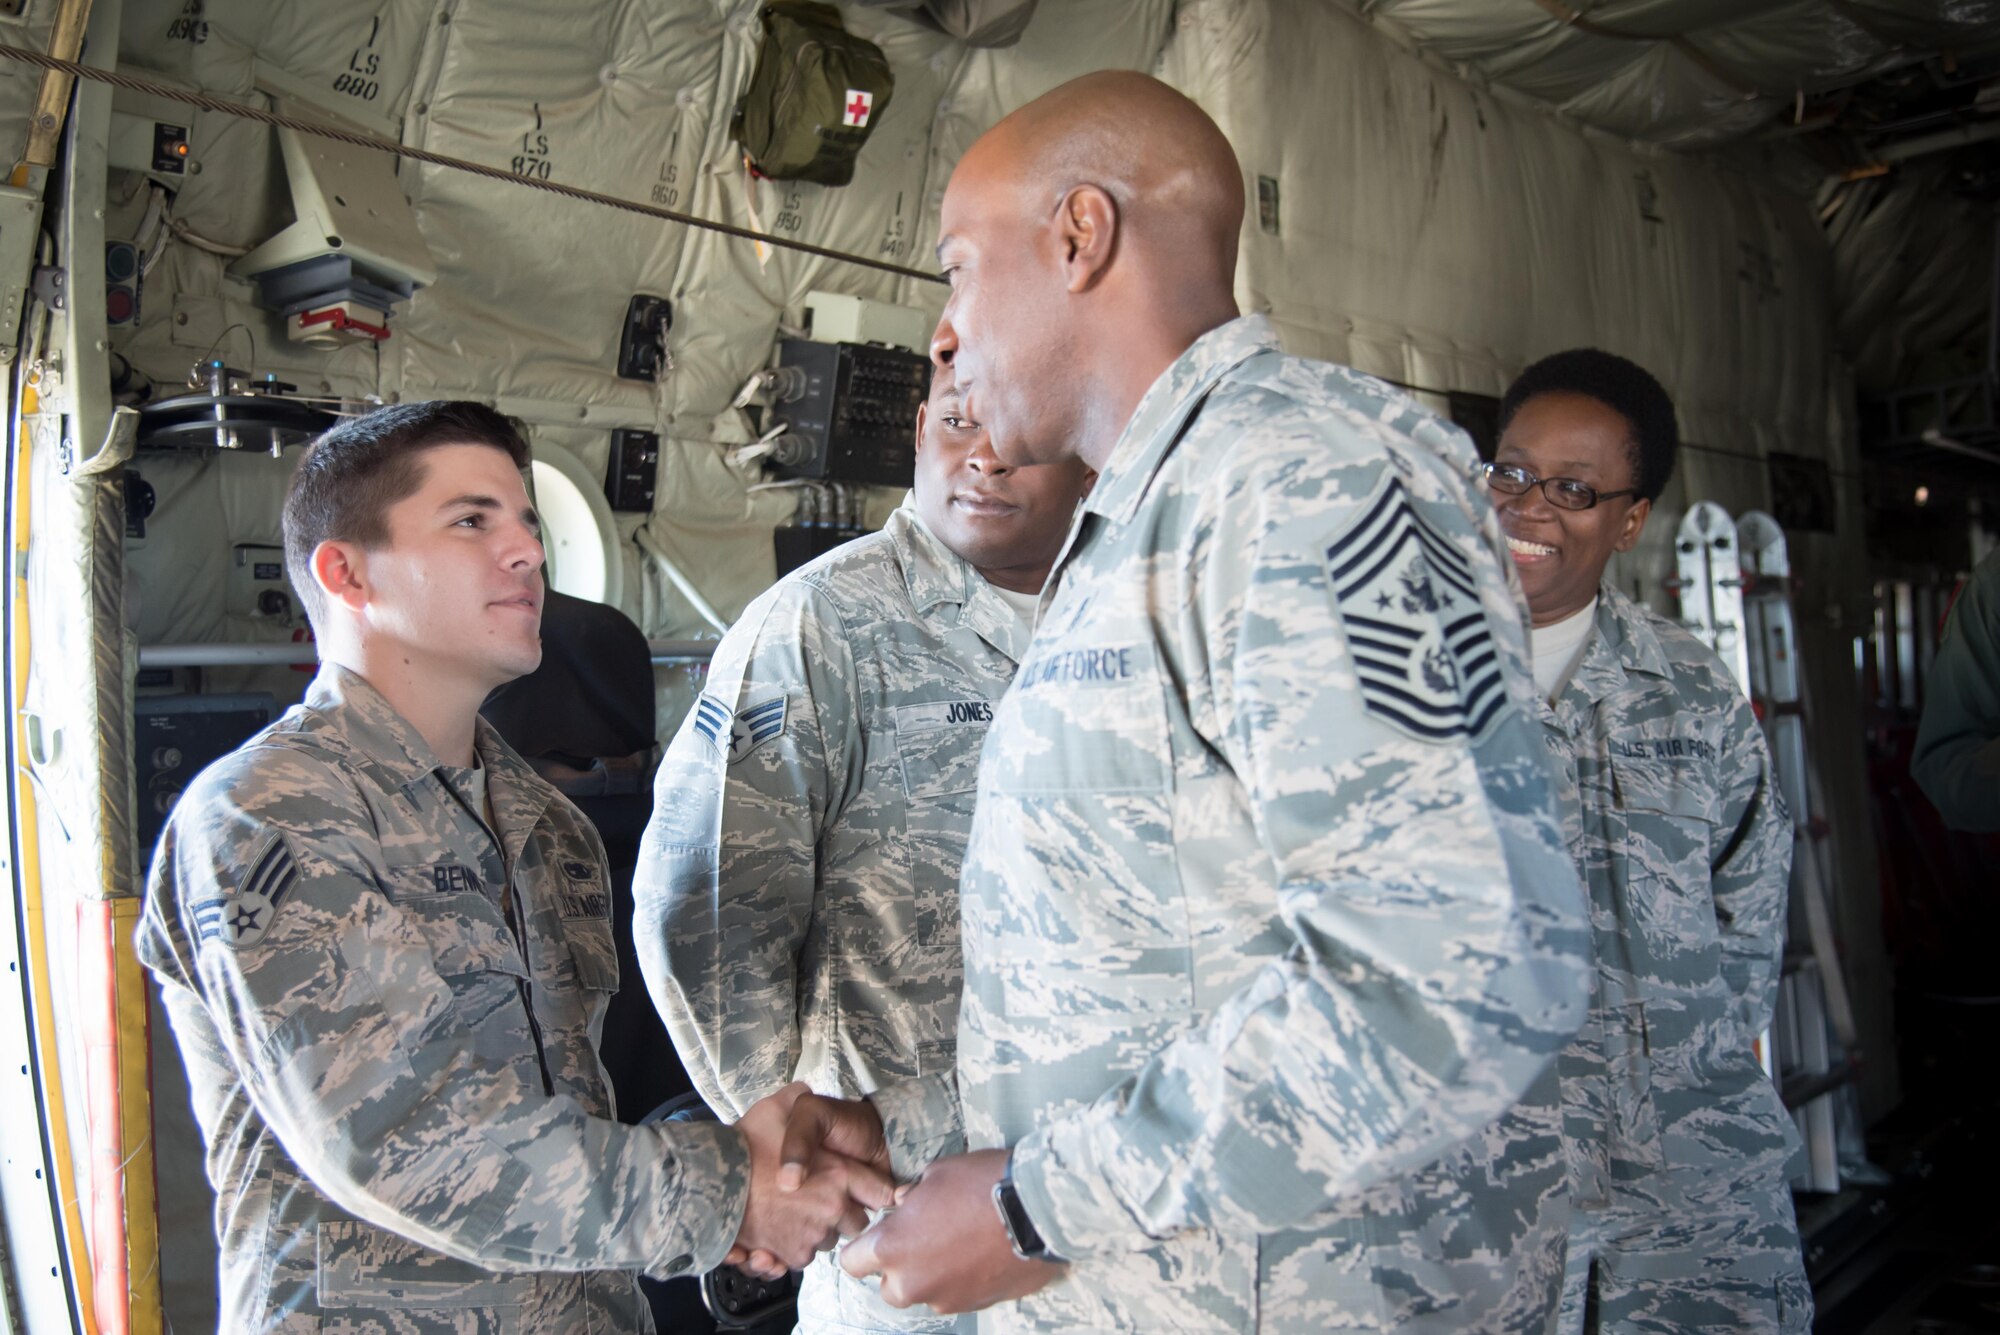 Chief Master Sergeant of the Air Force Kaleth O. Wright presents a coin to Senior Airman Cayce Bennett, 403rd Maintenance Squadron, during his visit to the 403rd Wing Oct. 25, 2017 at Keelser Air Force Base, Mississippi. (U.S. Air Force photo/Staff Sgt. Heather Heiney)